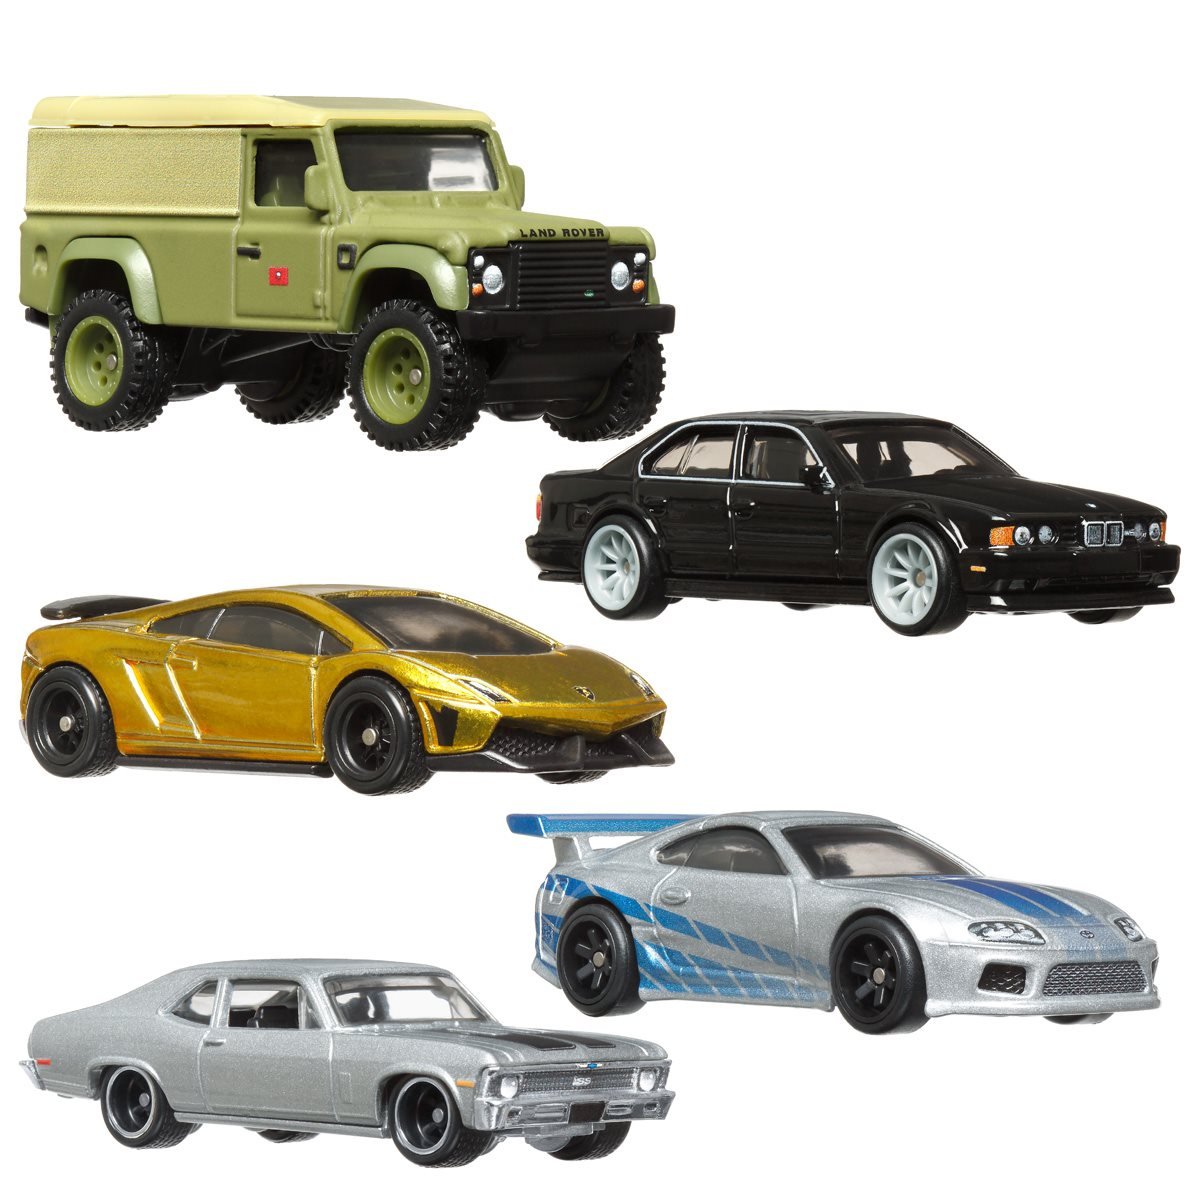  Hot Wheels Fast & Furious Collection of 1:64 Scale Vehicles  from The Fast Film Franchise, Modern & Classic Cars, Great Gift for  Collectors & Fans of The Movies : Toys 